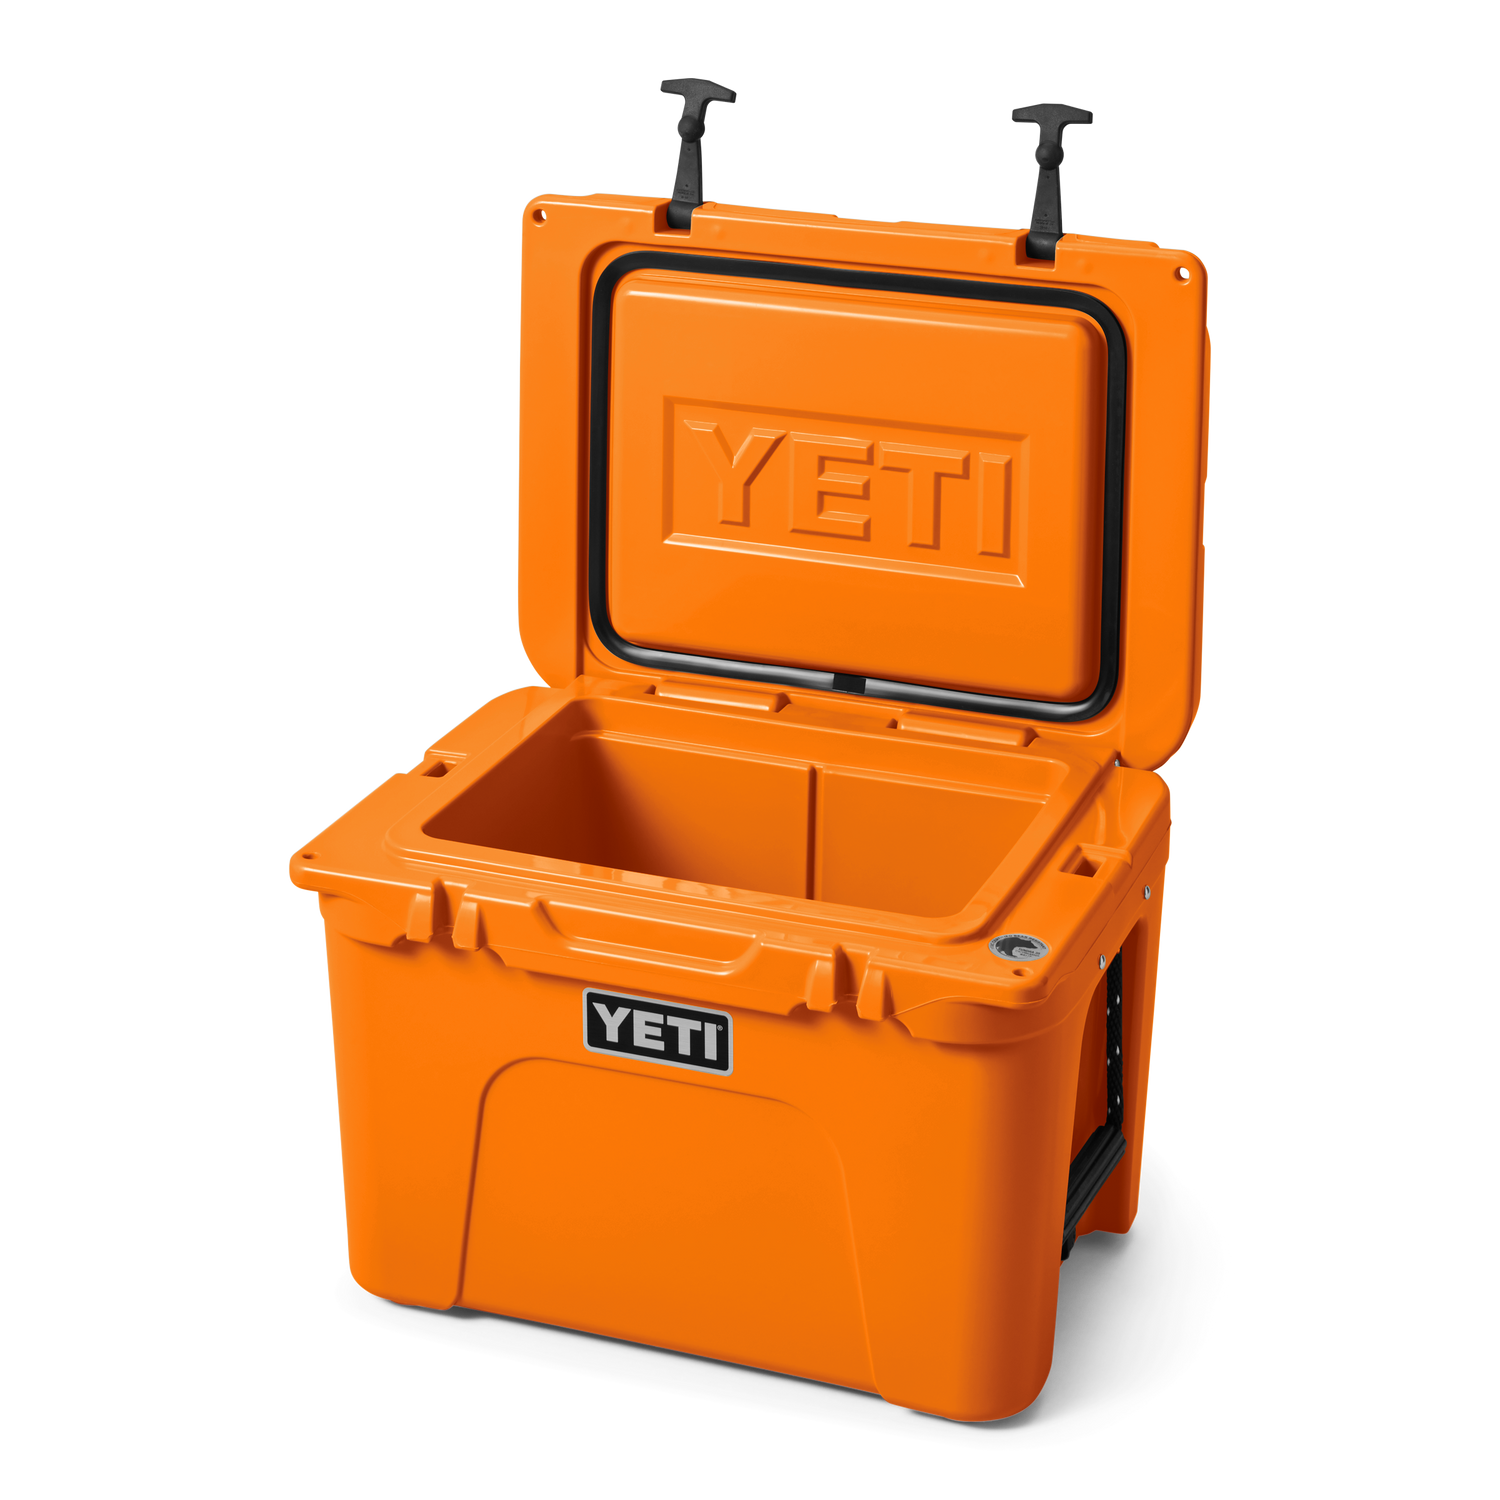 YETI Tundra Coolers, Free UK Delivery